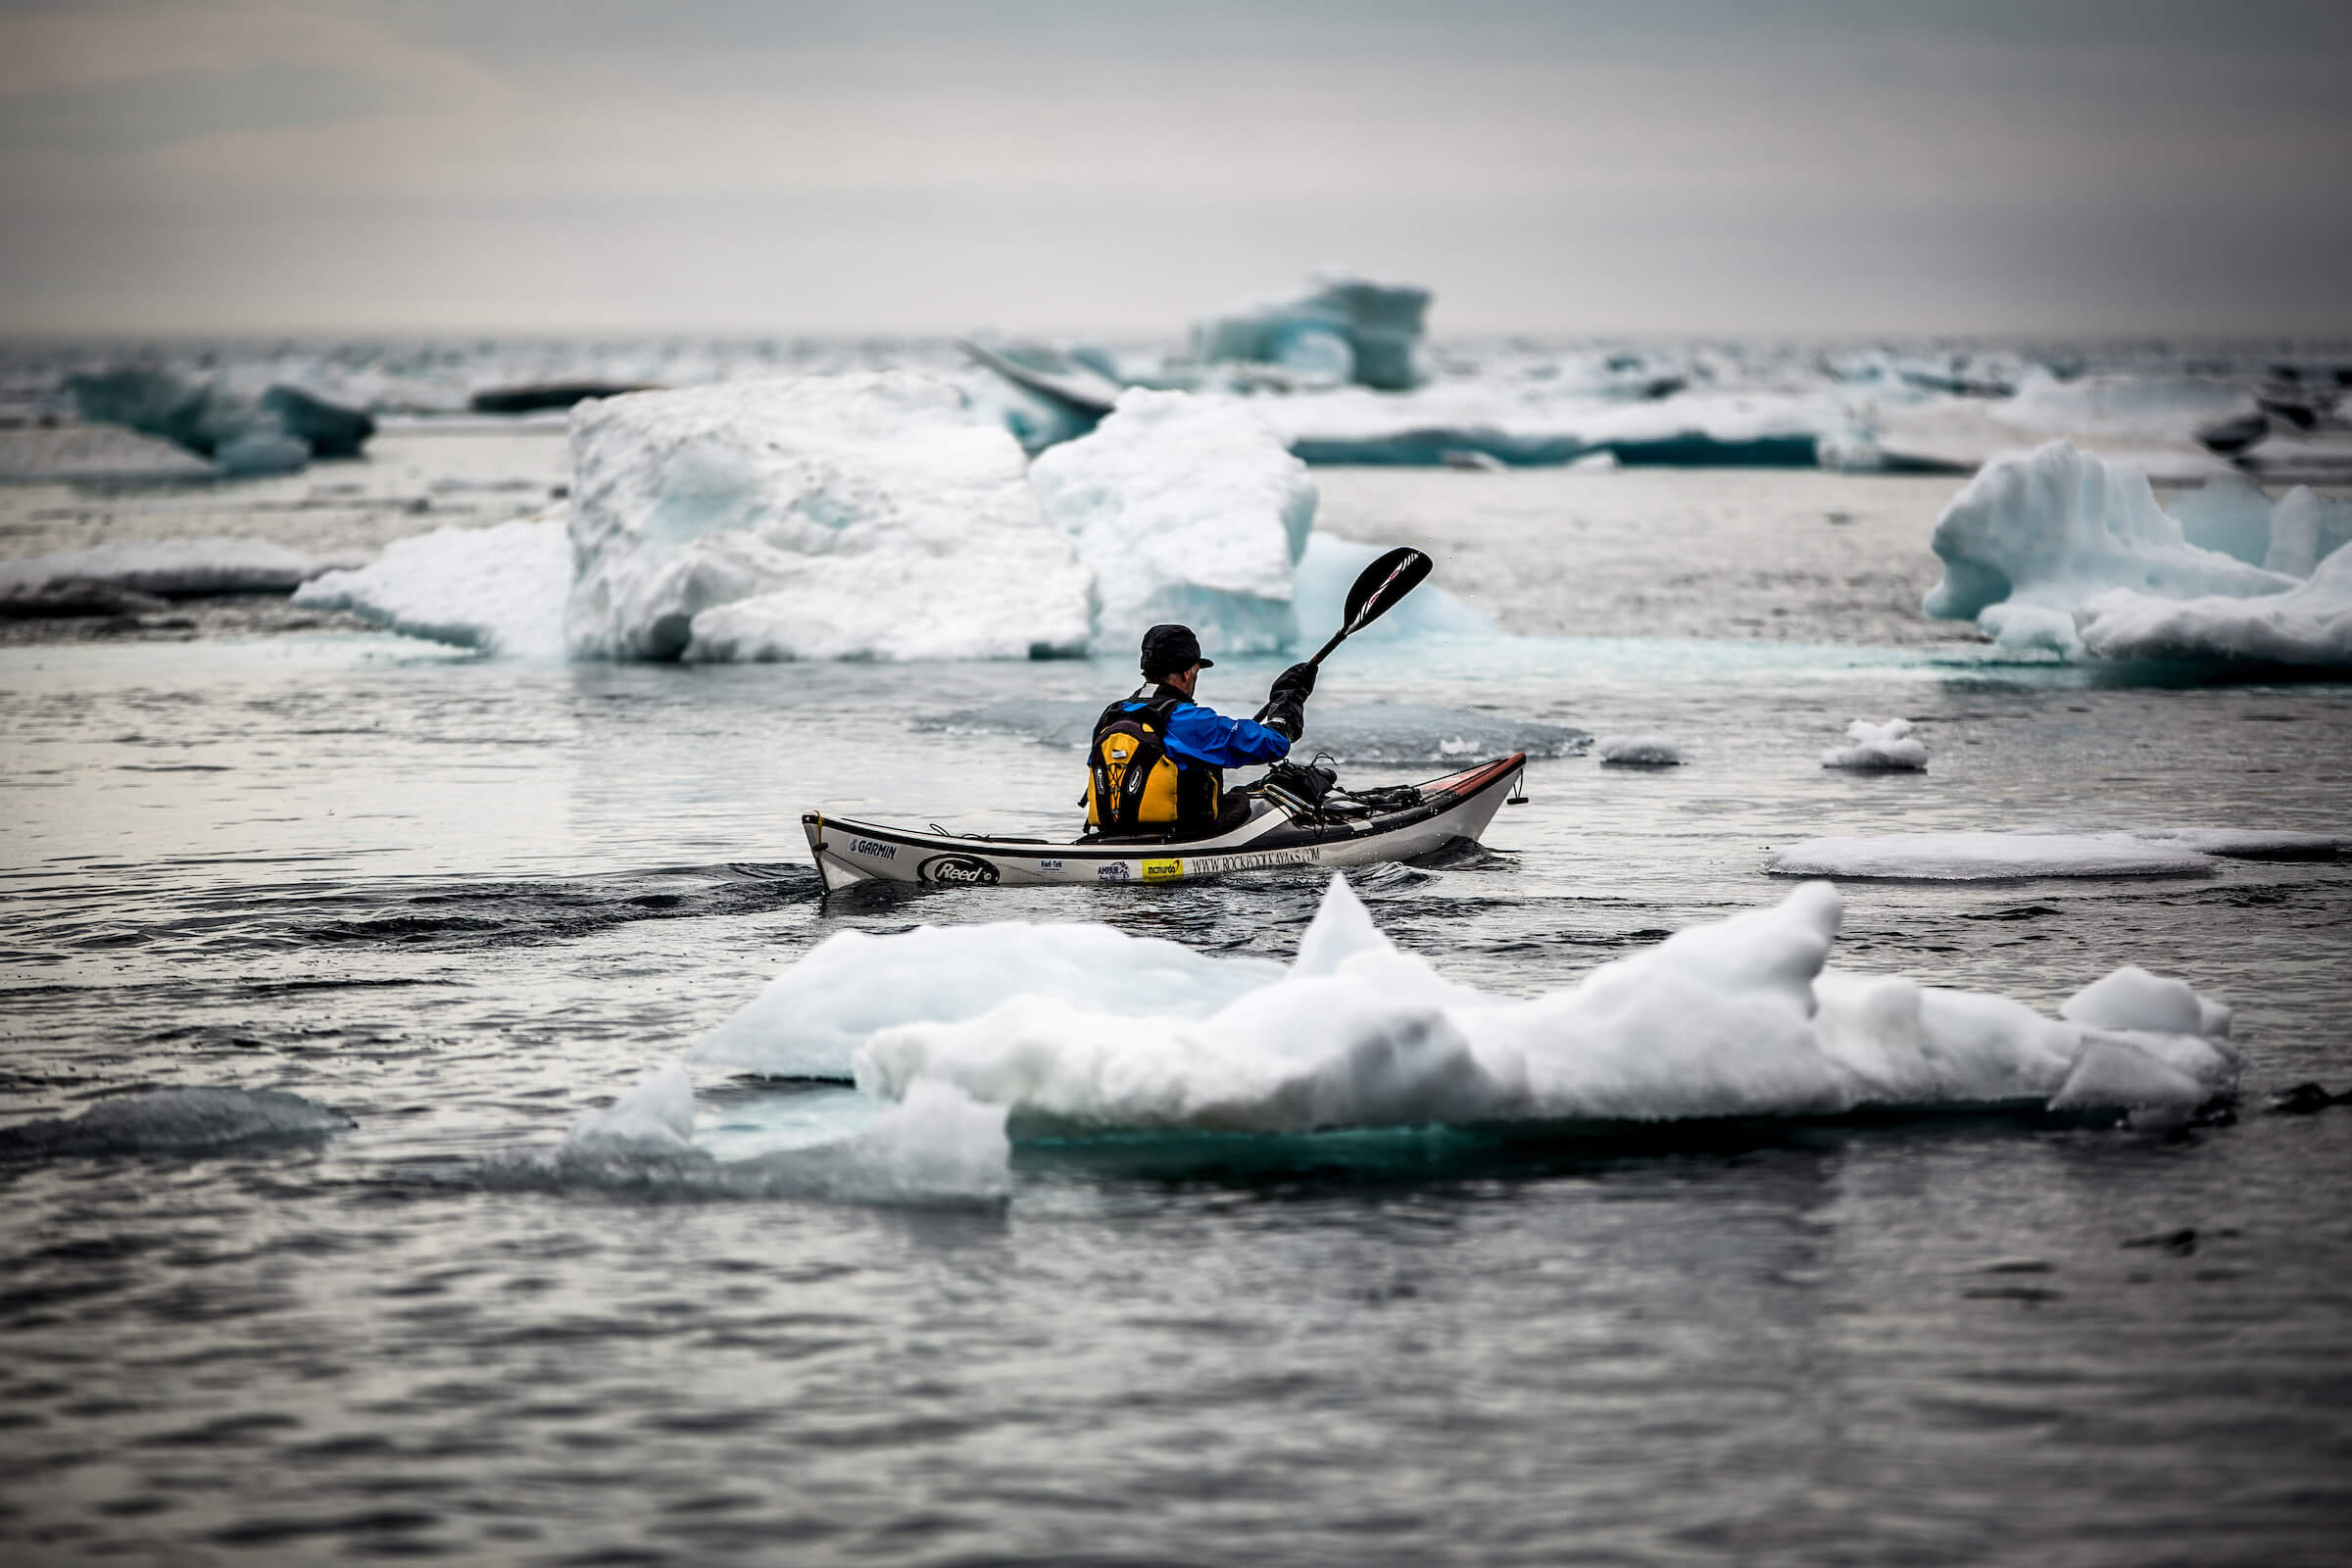 A sea kayaker among ice floes near Tasiilaq in East Greenland